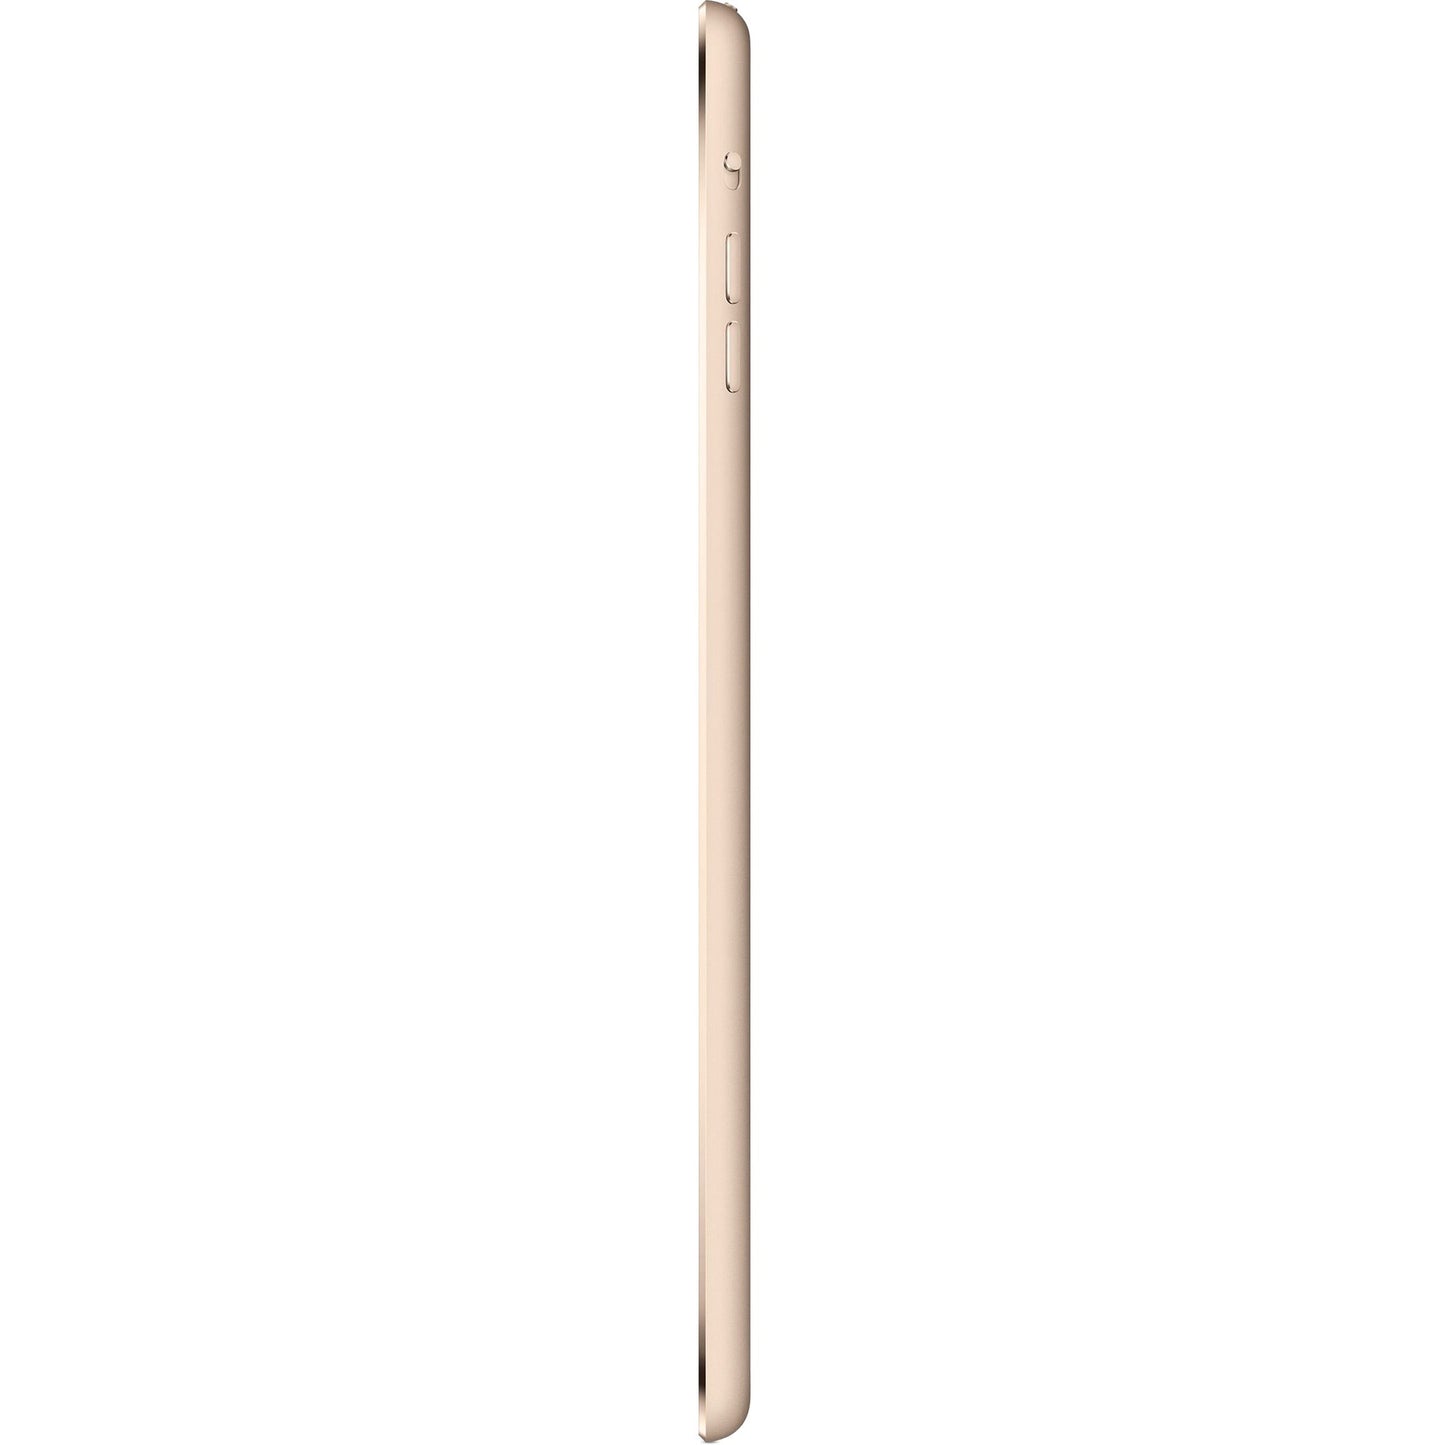 Apple iPad mini 3 MGYK2LL/A 128 GB Tablet - 7.9" 4:3 Multi-touch Screen - 2048 x 1536 - Retina Display, In-plane Switching (IPS) Technology - Apple A7 - iOS 8 - Gold